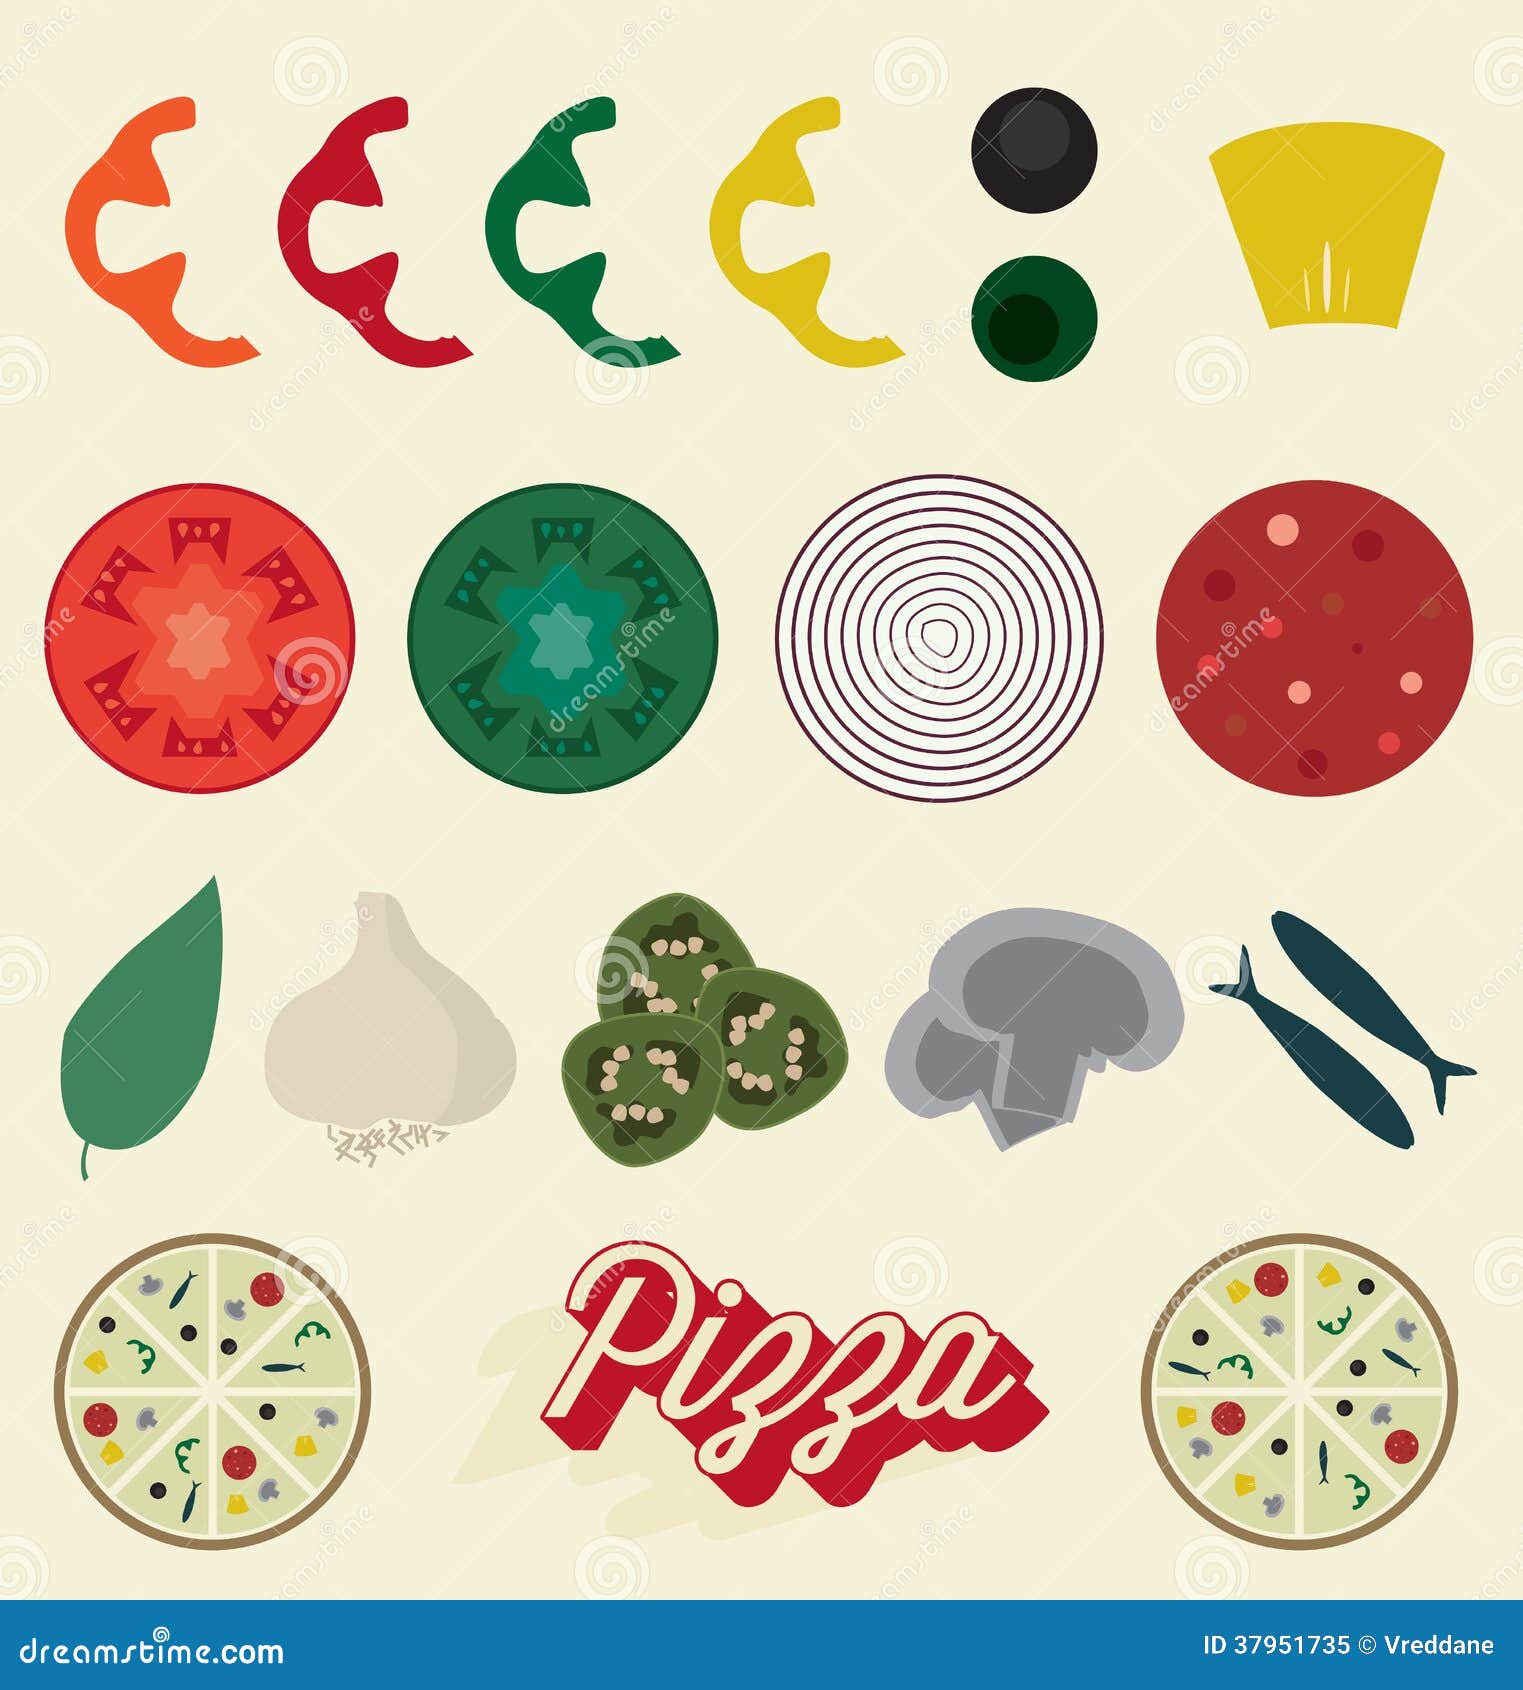 pizza ingredients clipart - photo #24